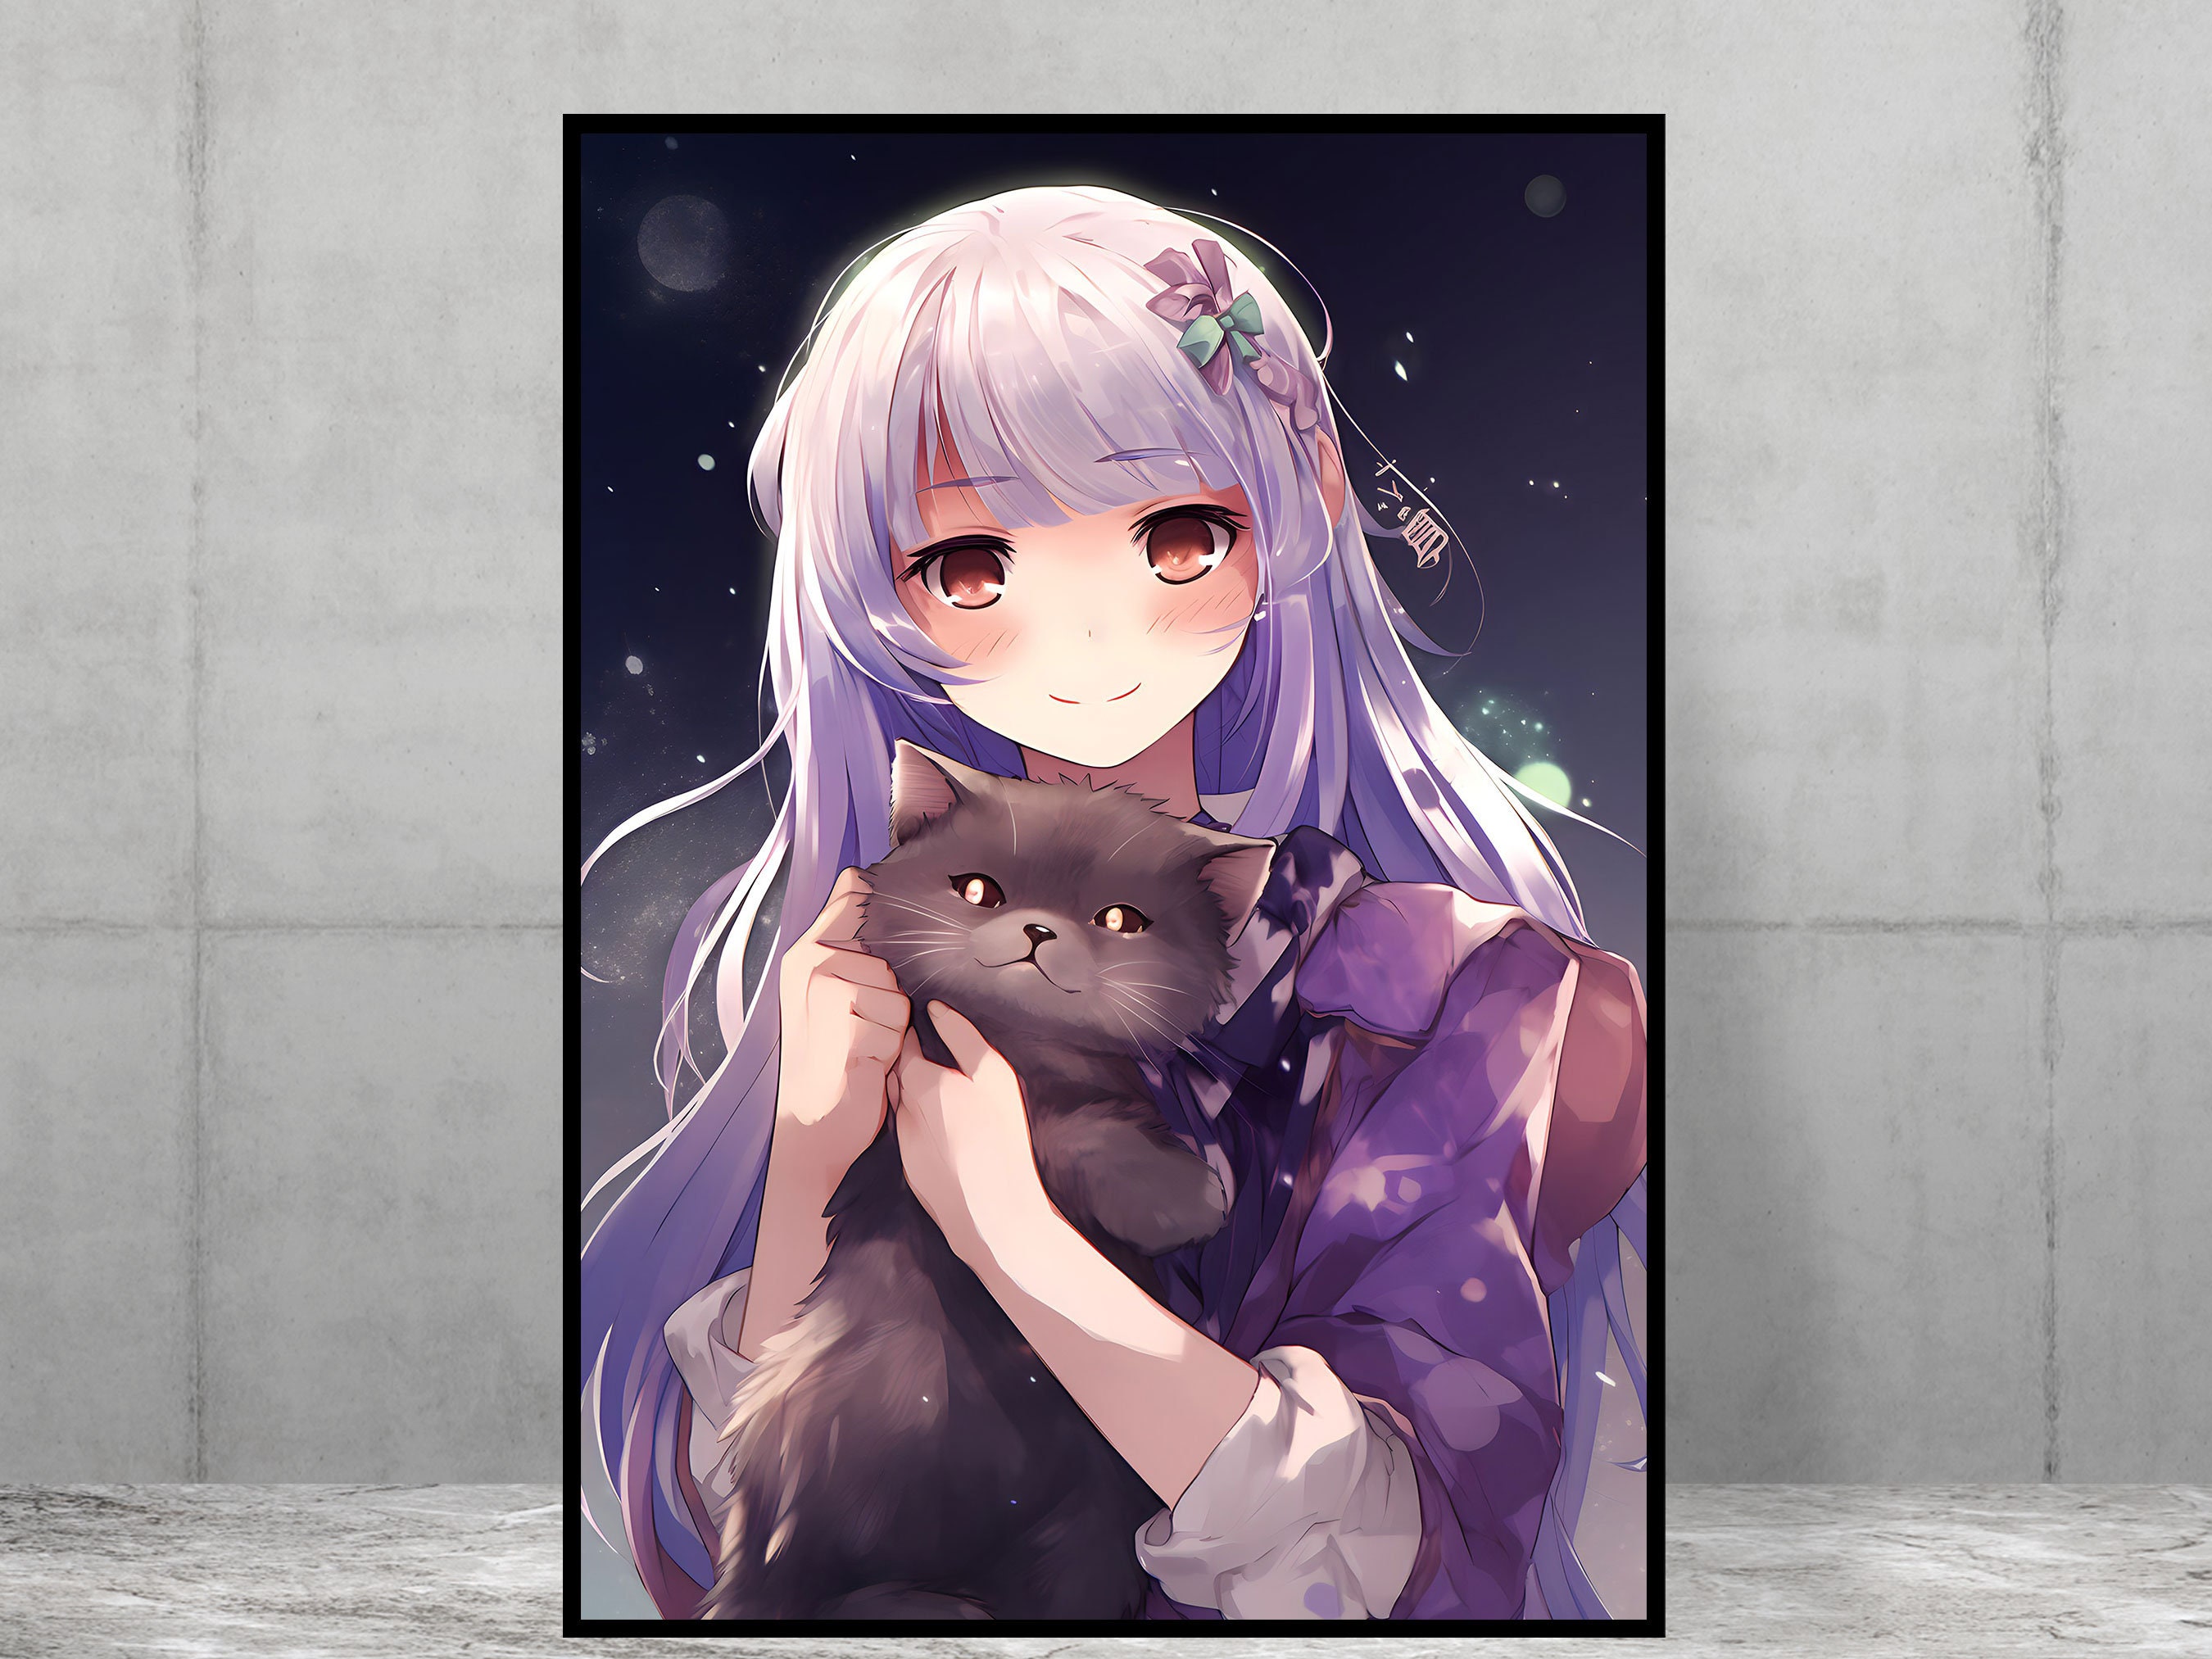 Aesthetic Anime Girl Pfp Greeting Card for Sale by Cute-World